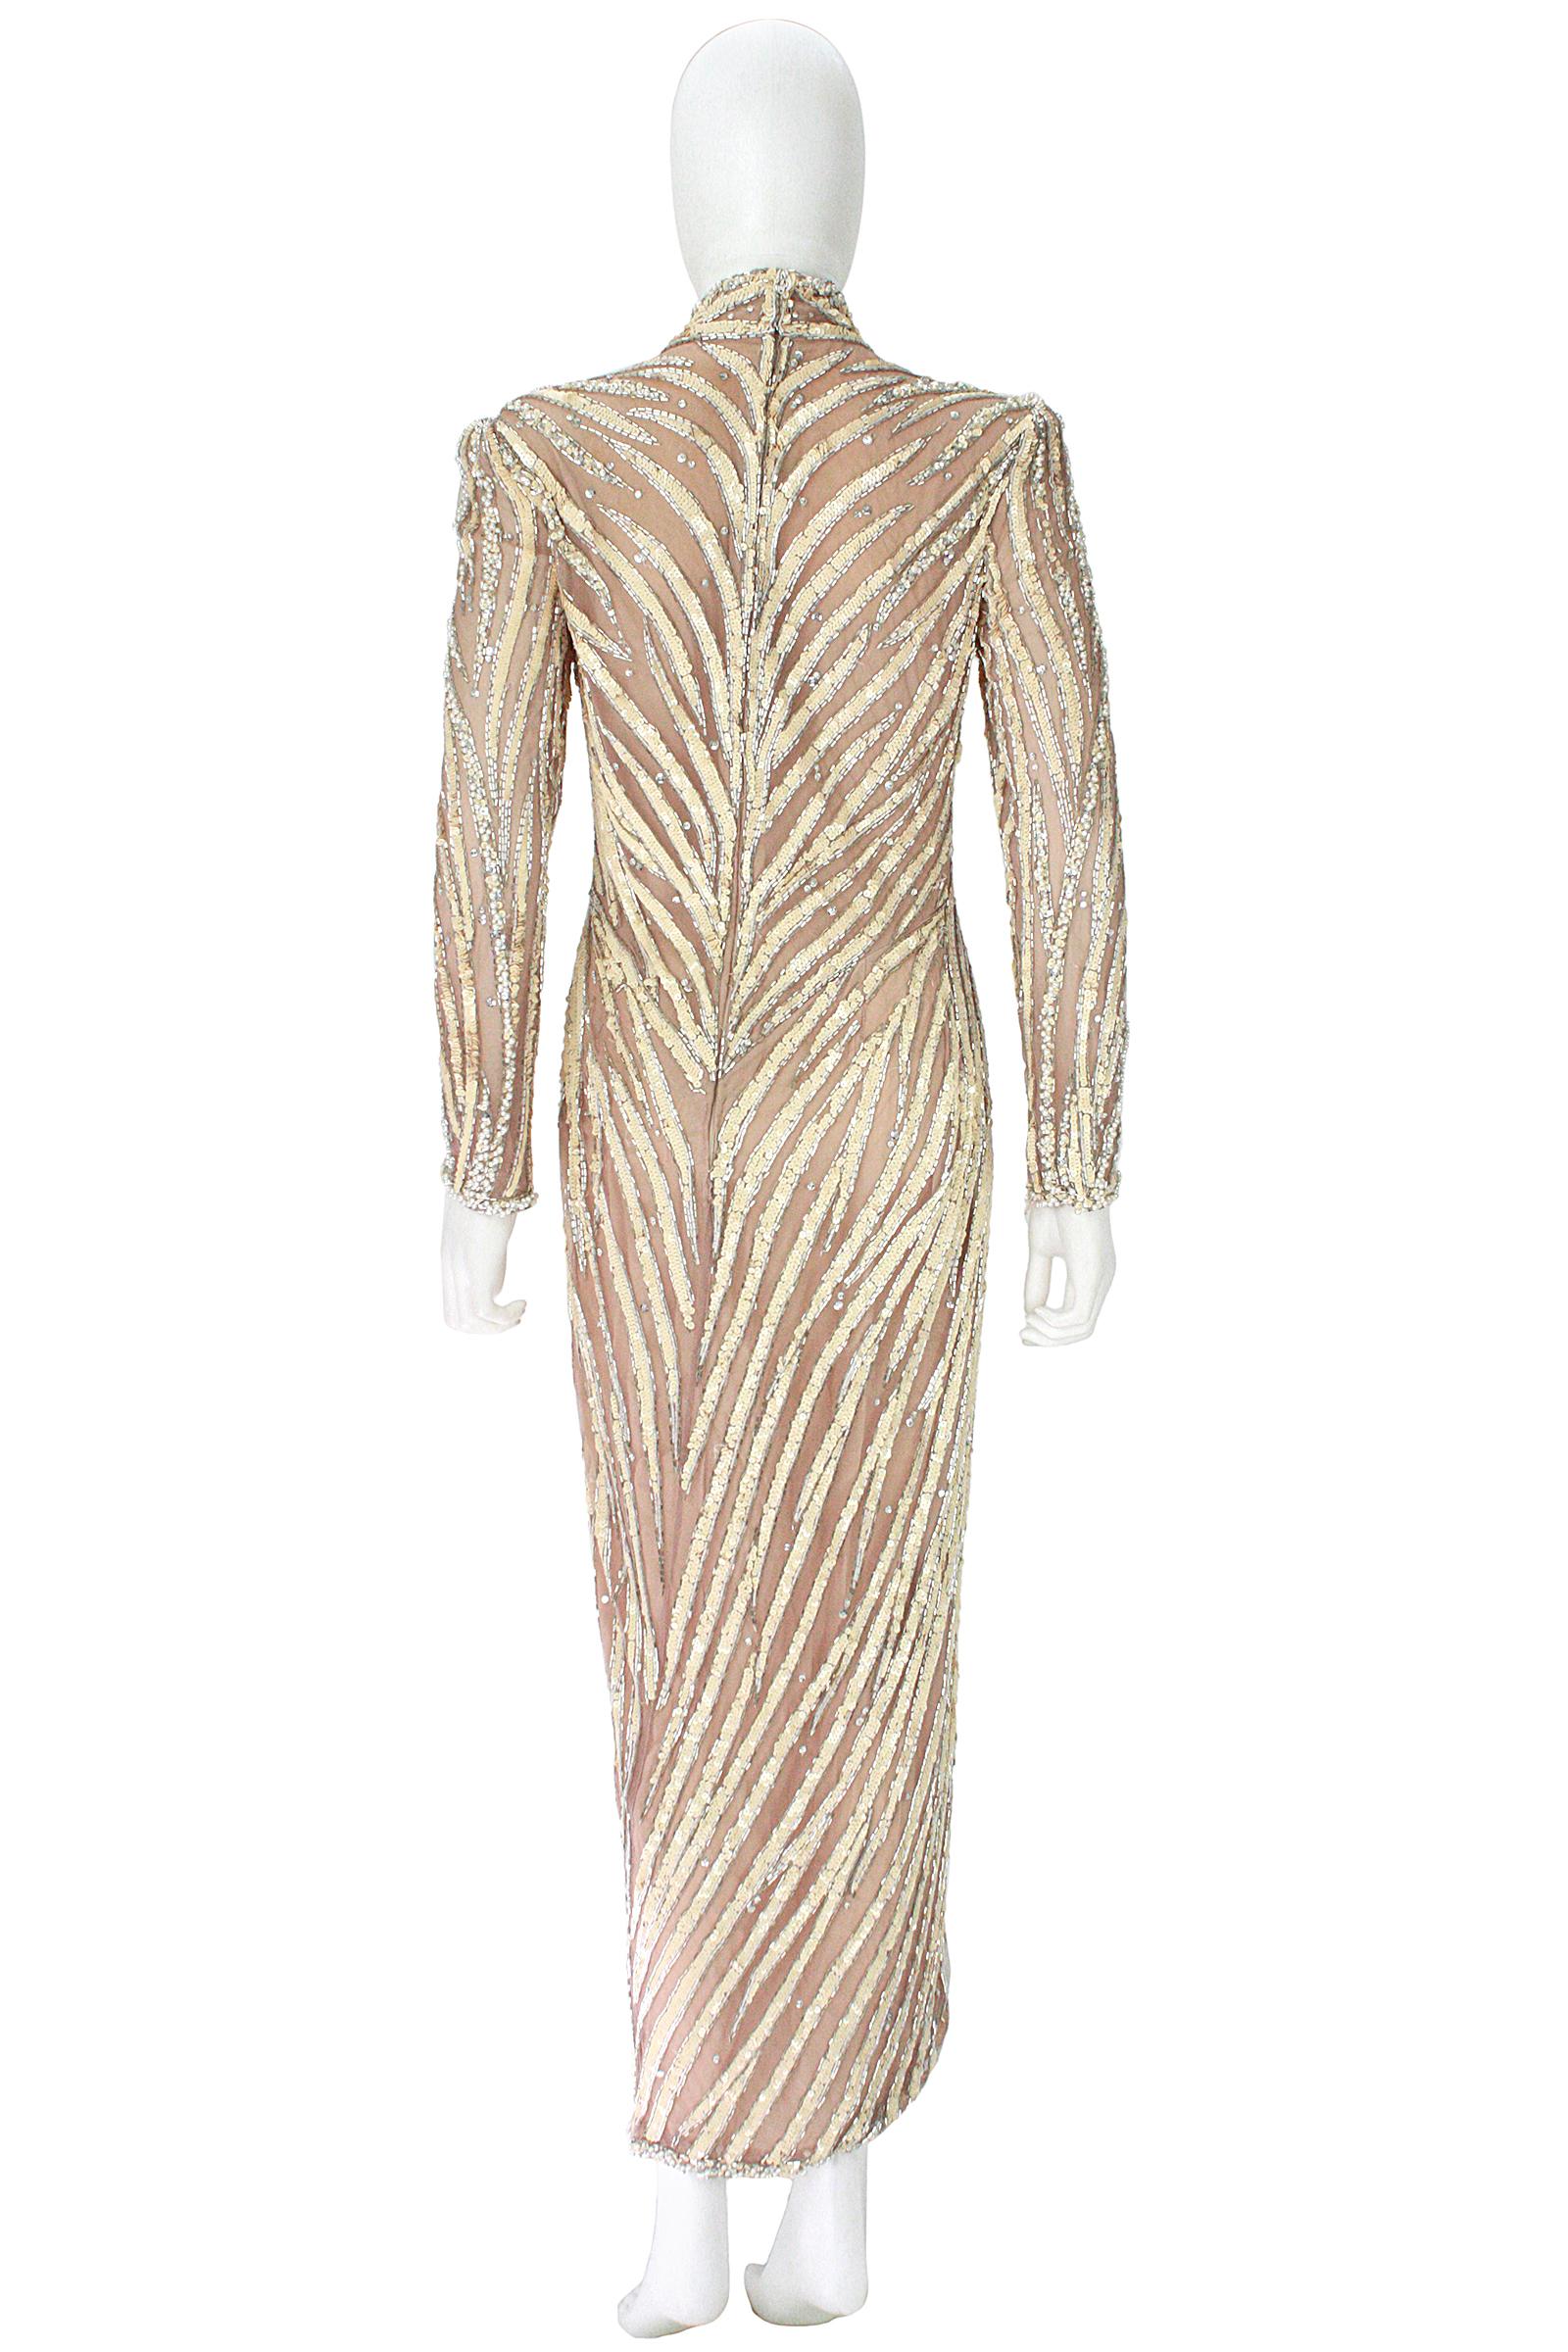 Bob Mackie Cream Sequin Beaded Gown with Slit  For Sale 2